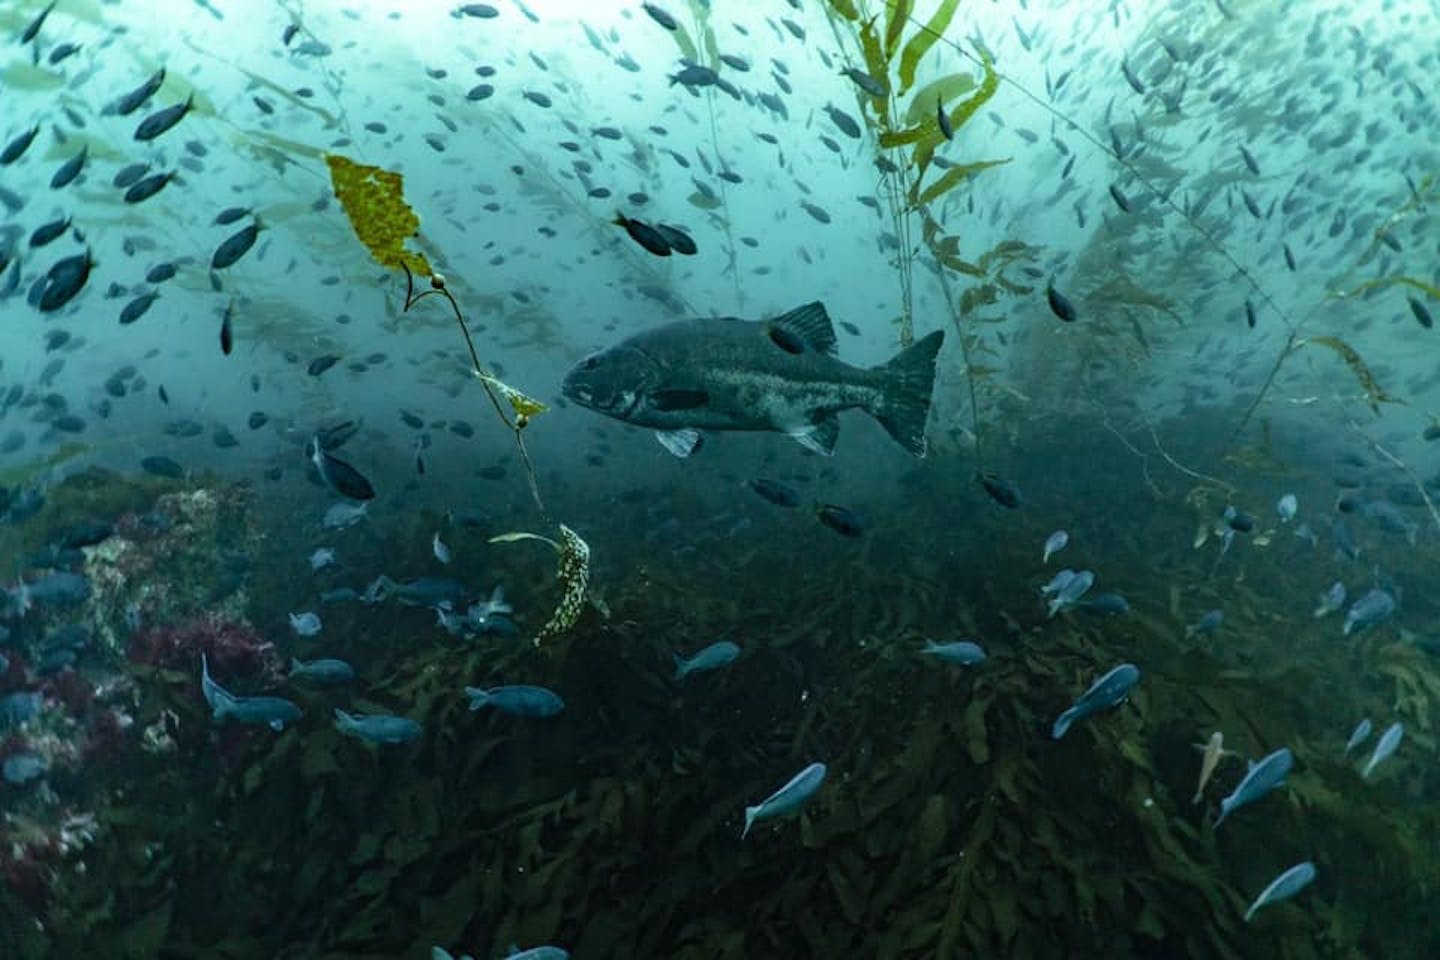 A large dark fish swimming in a kelp forest and surrounded by smaller fish.